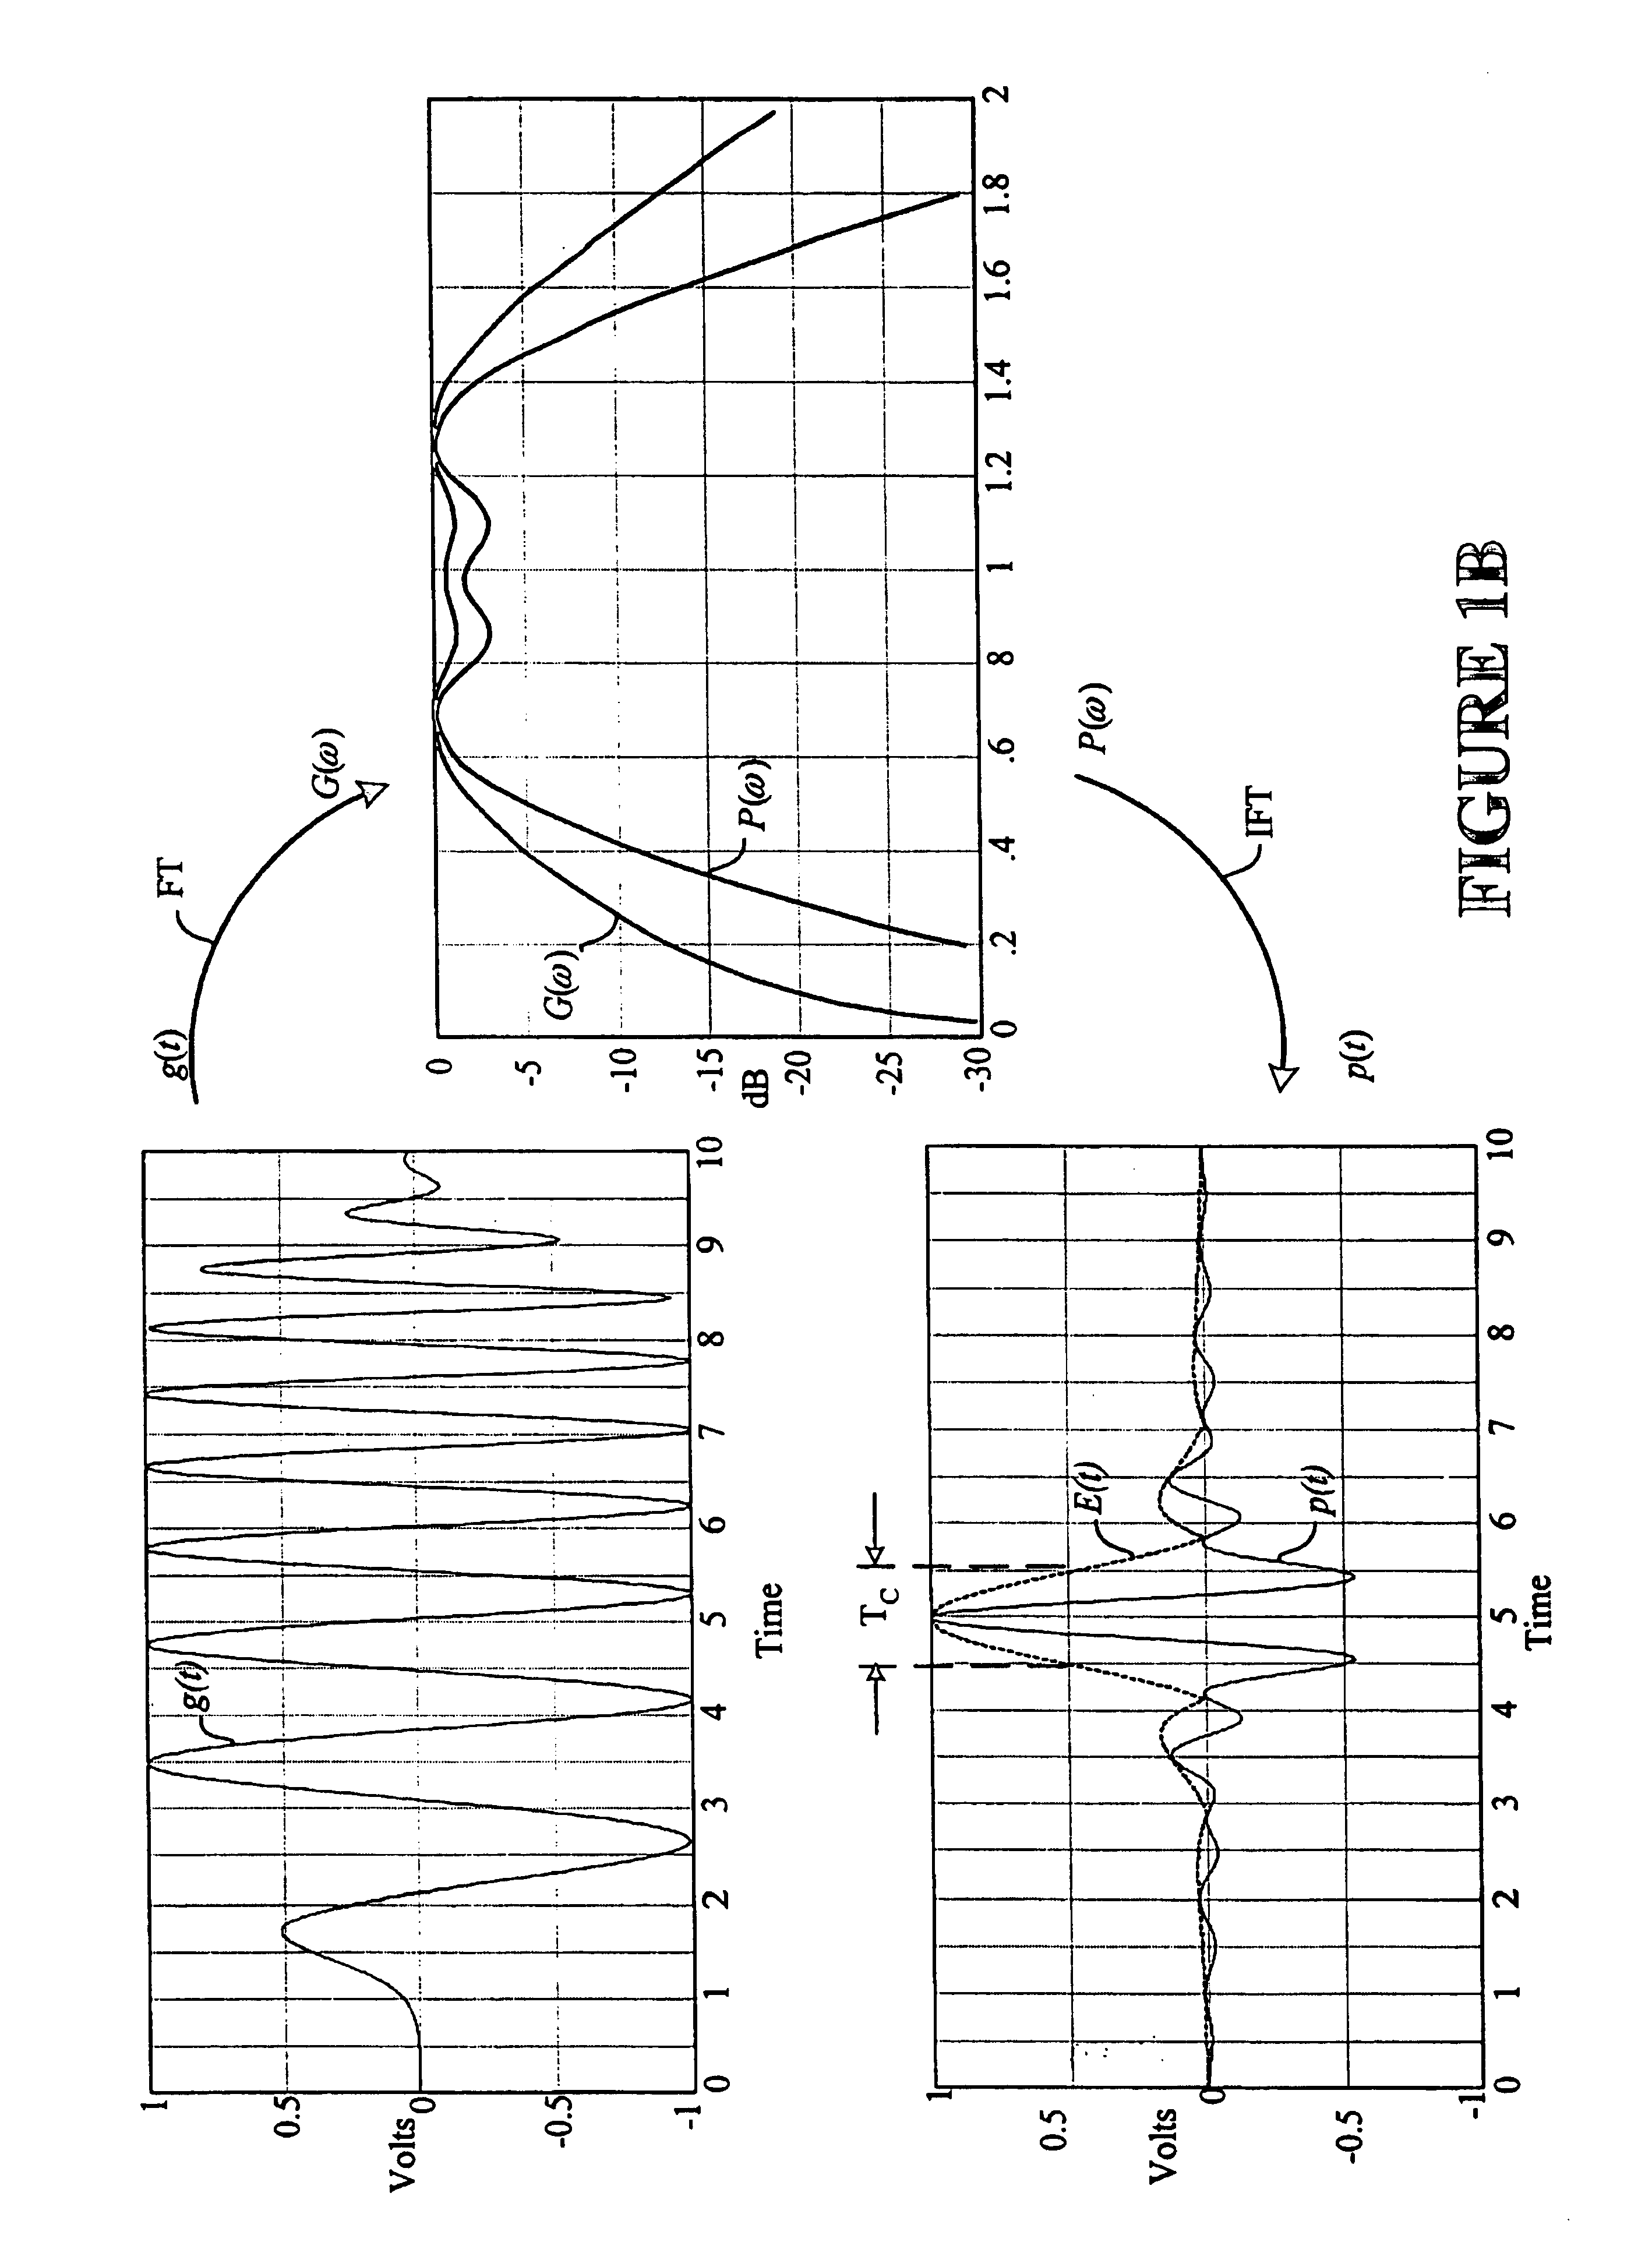 Method and system for enabling device functions based on distance information